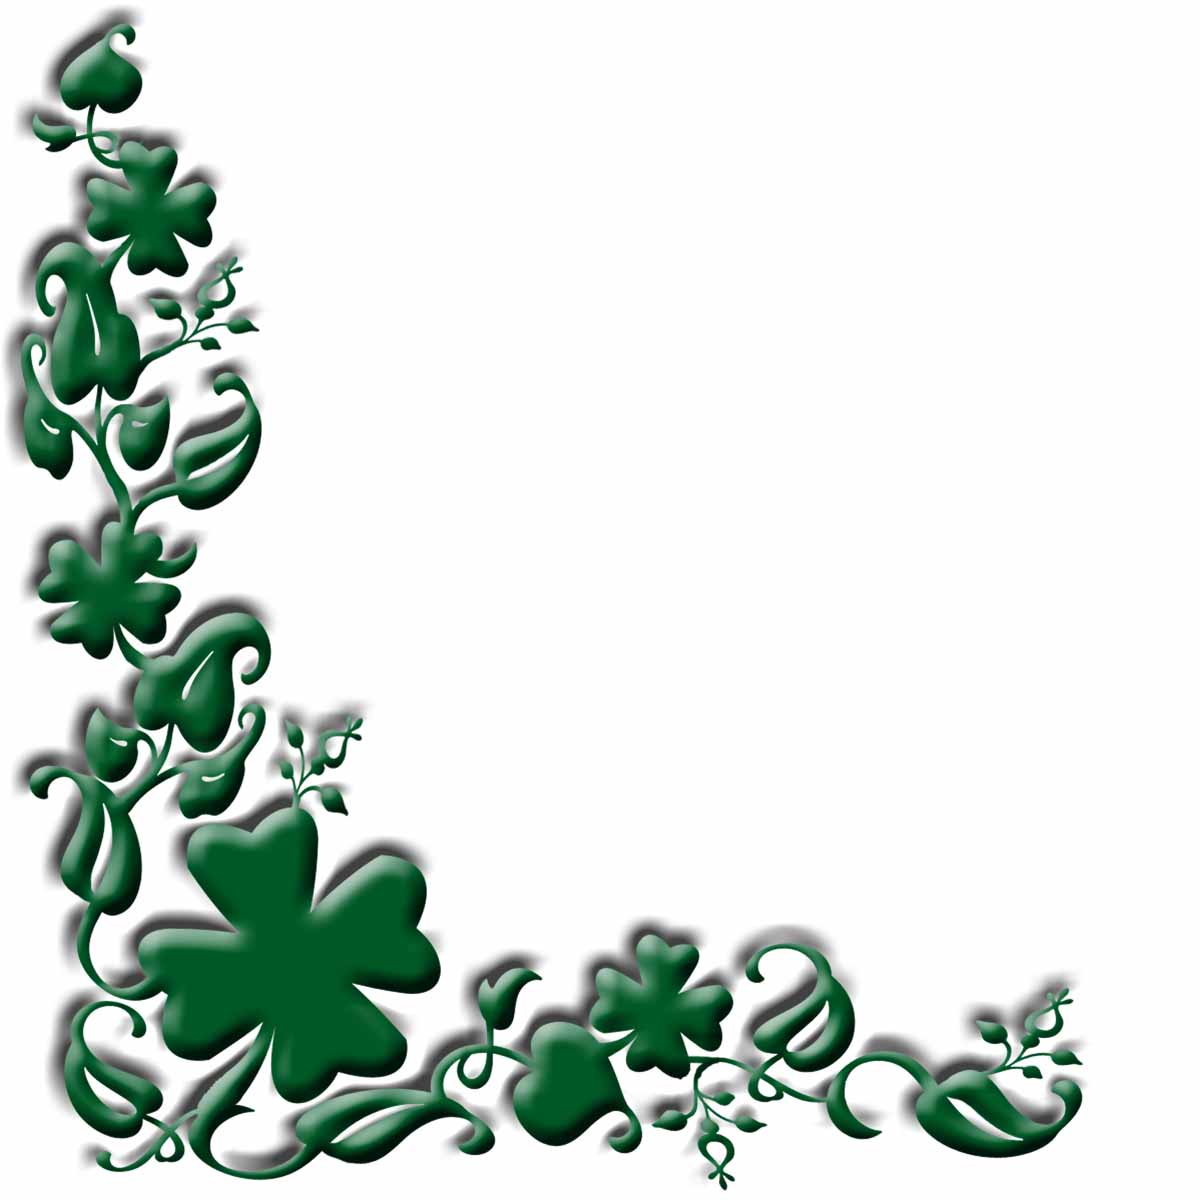 Ireland Clip Art Free - Free Clipart Images